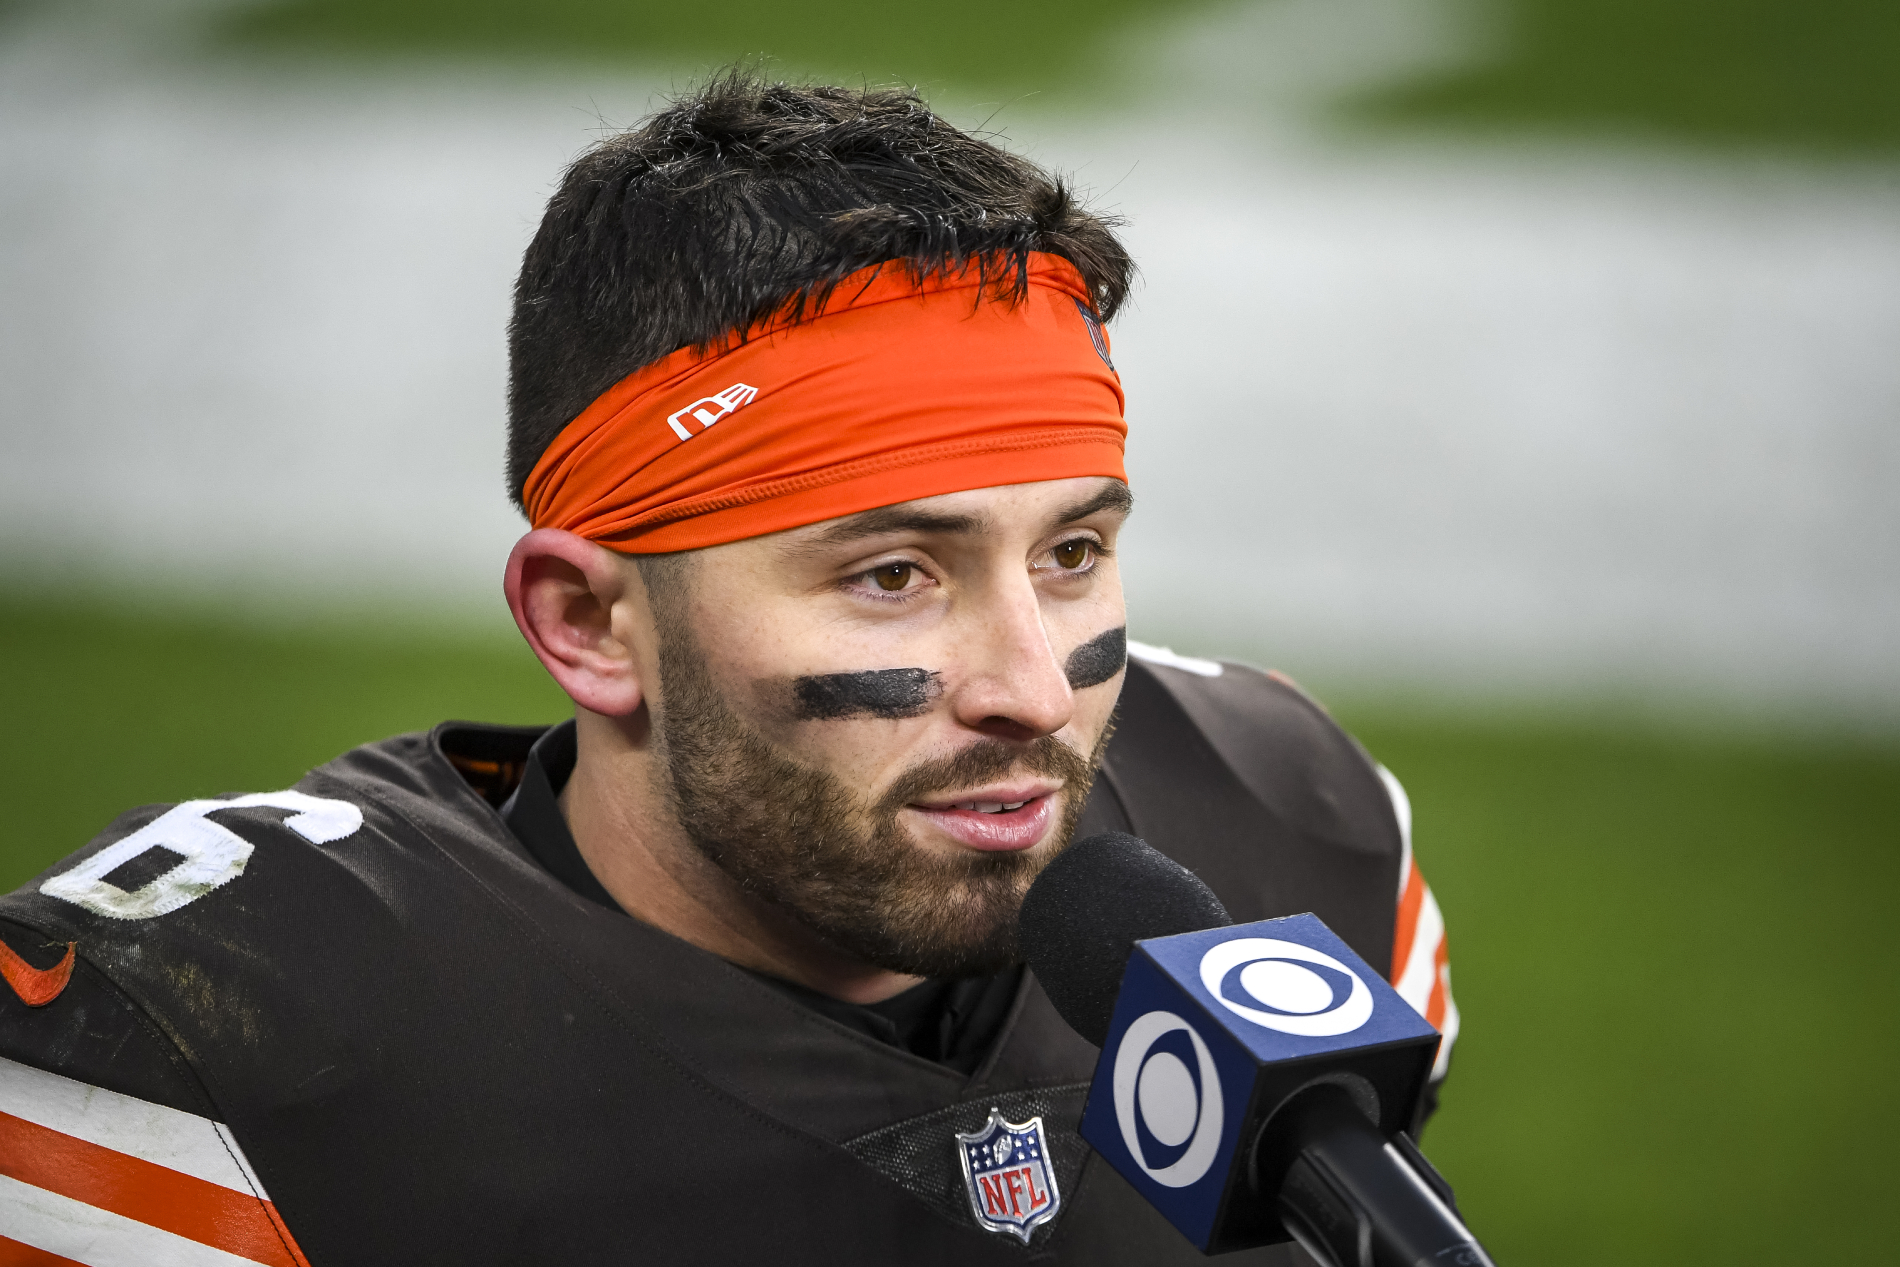 Baker Mayfield and the Browns already have a ton of adversity to overcome. JuJu Smith-Schuster has now also given them some extra motivation.